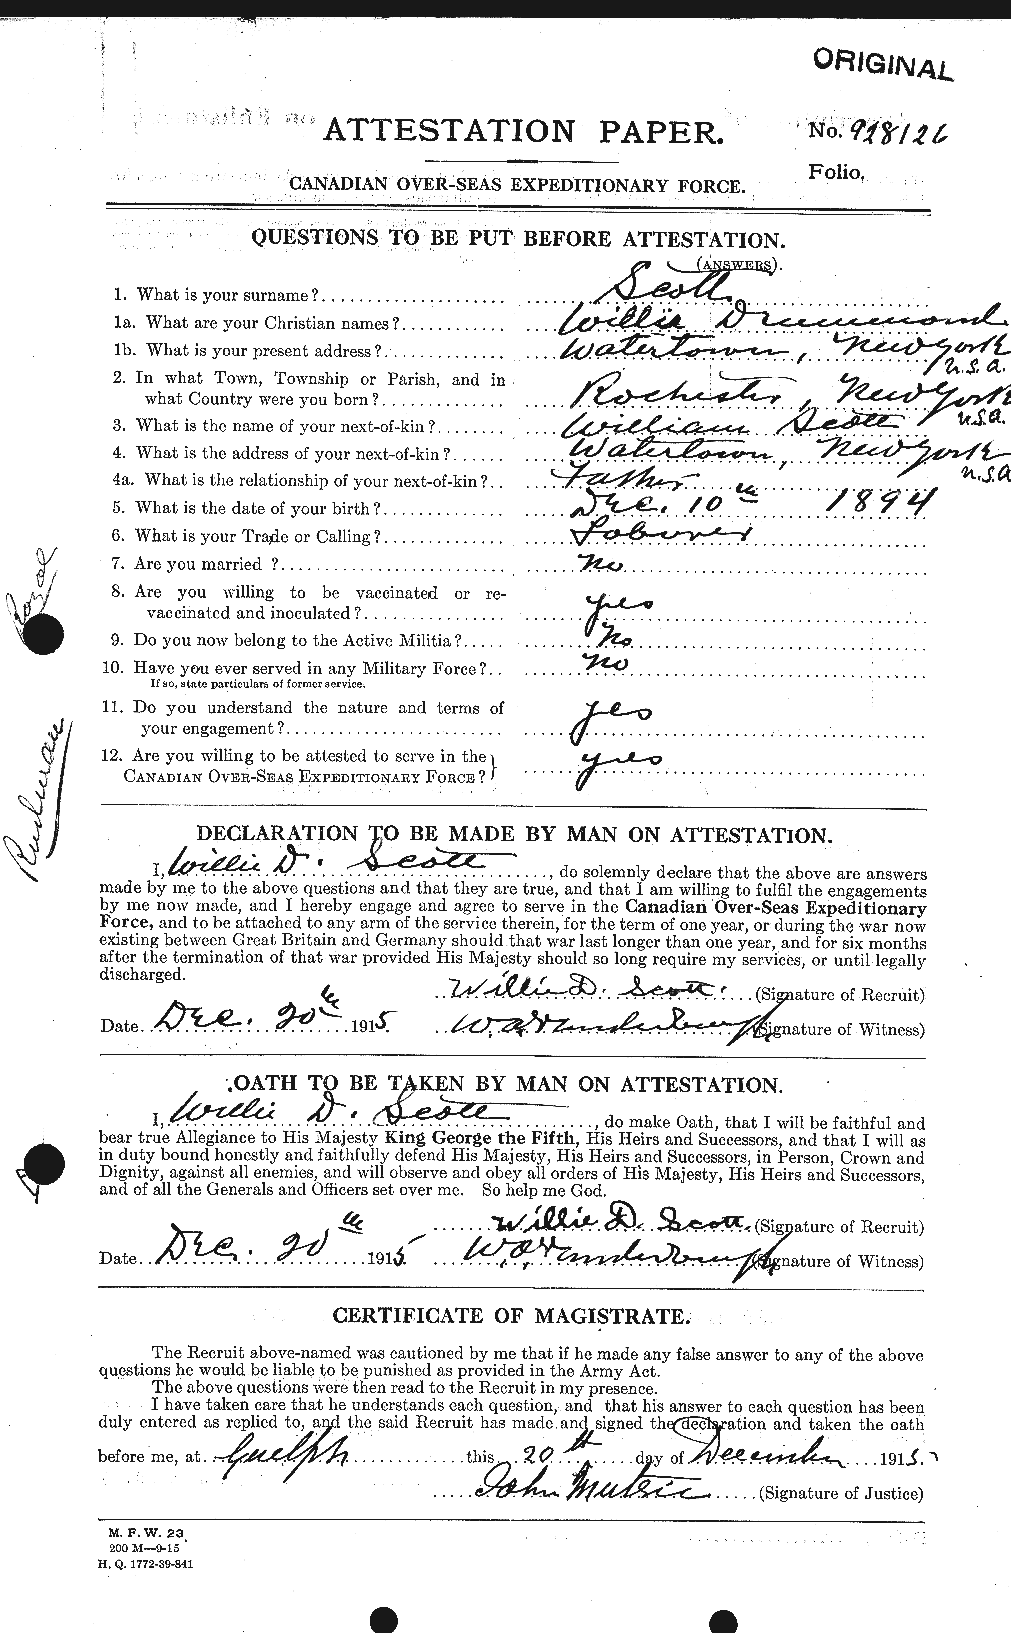 Personnel Records of the First World War - CEF 087248a